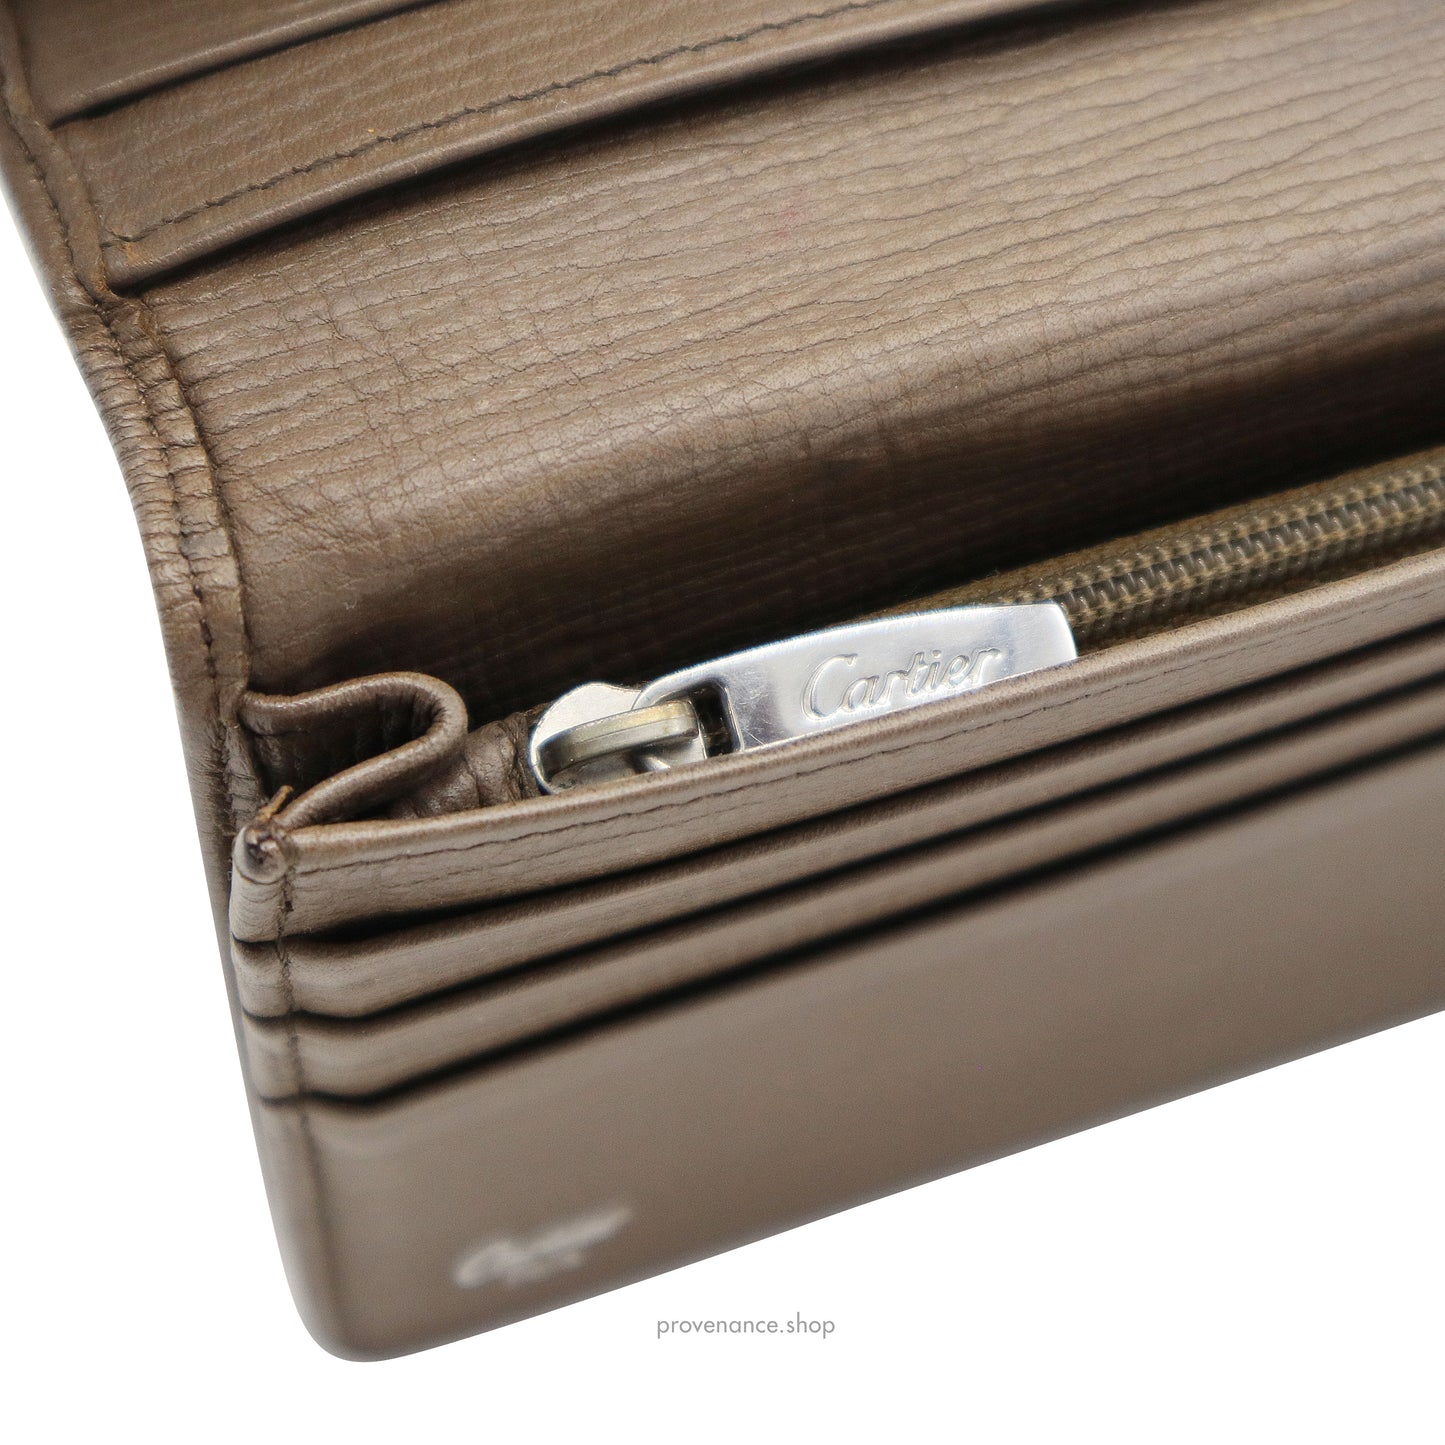 Cartier Long Wallet - Taupe Leather